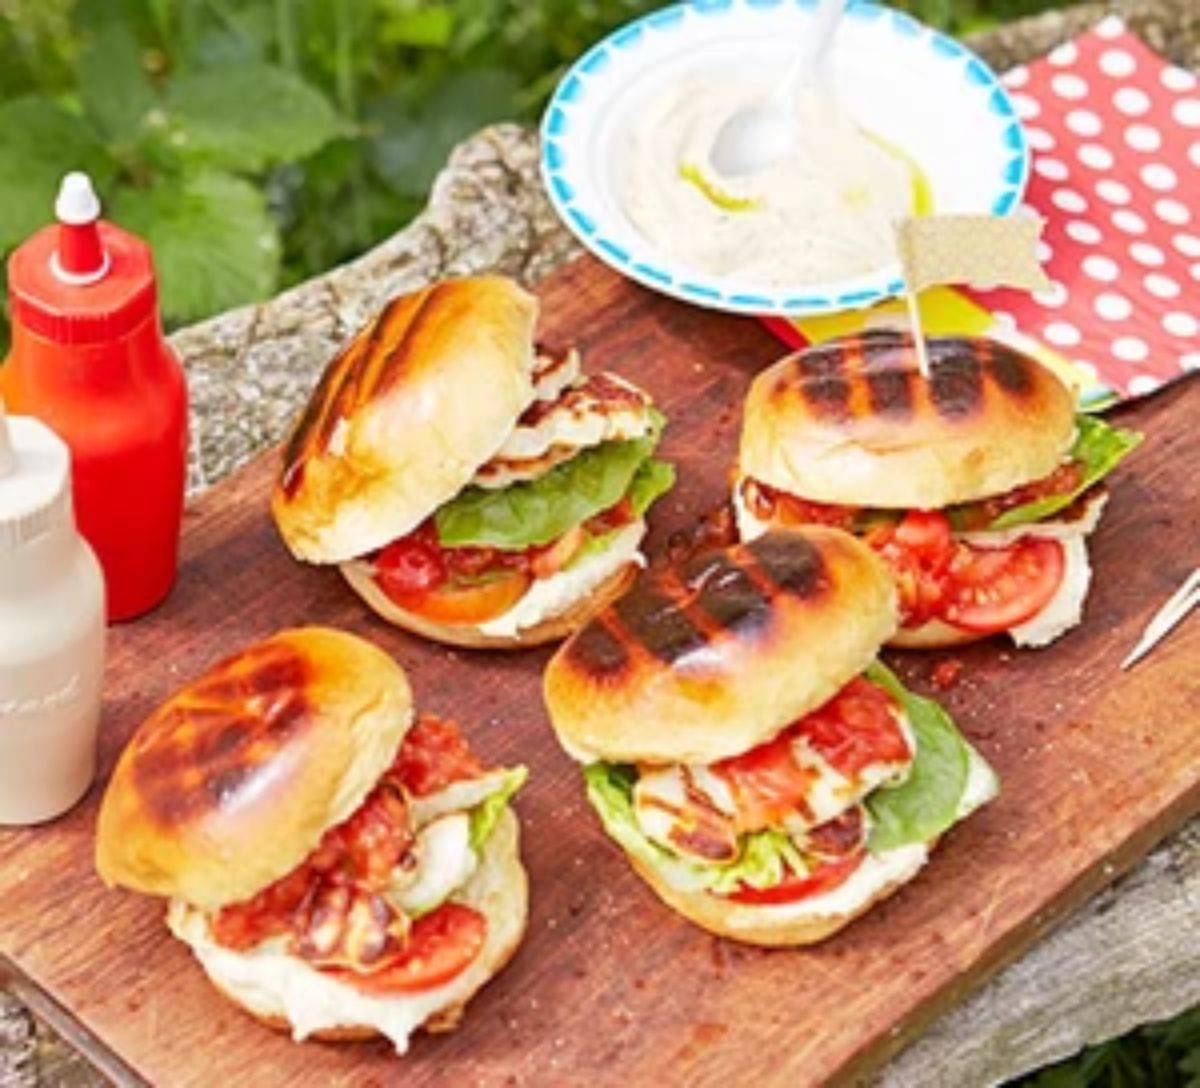 Halloumi burgers on a wooden cutting board.